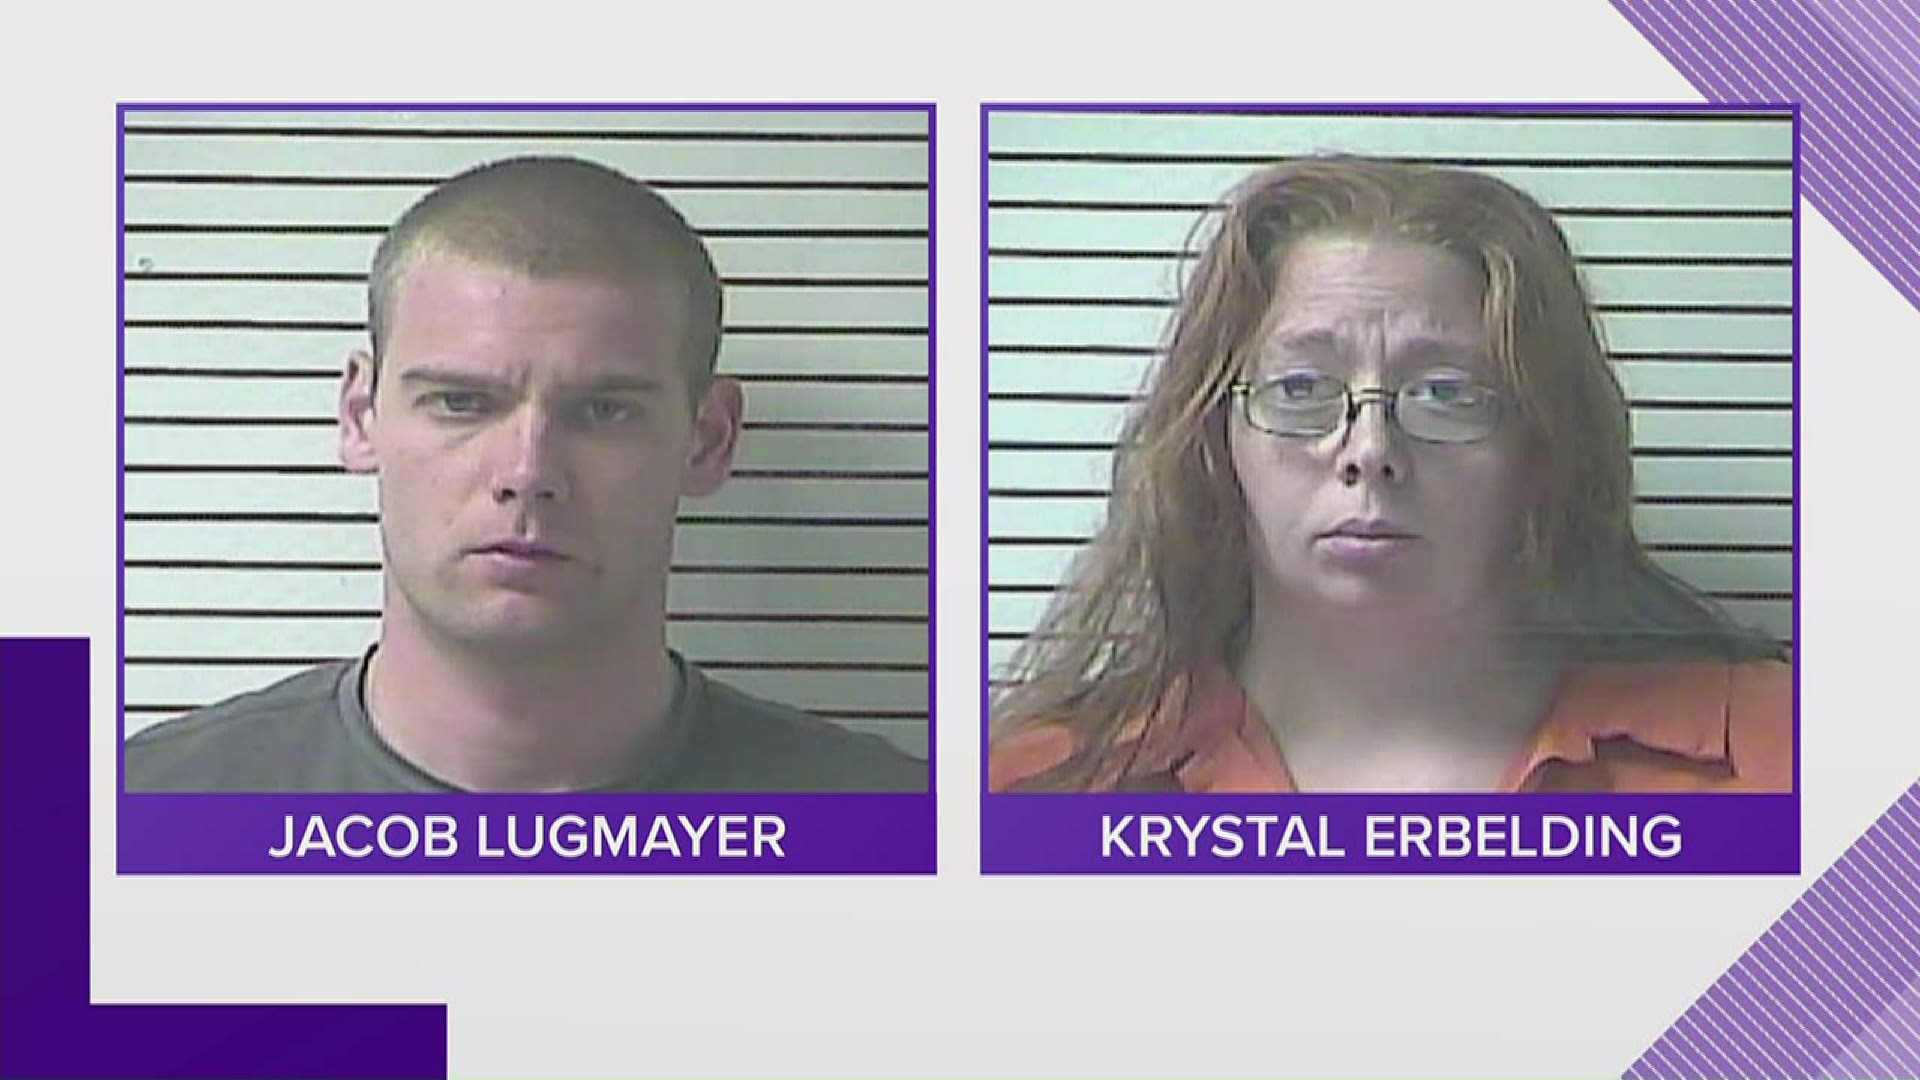 27-year-old jacob lugmayer and 33-year-old krystal erbelding also face charges of robbery and abuse of a corpse.